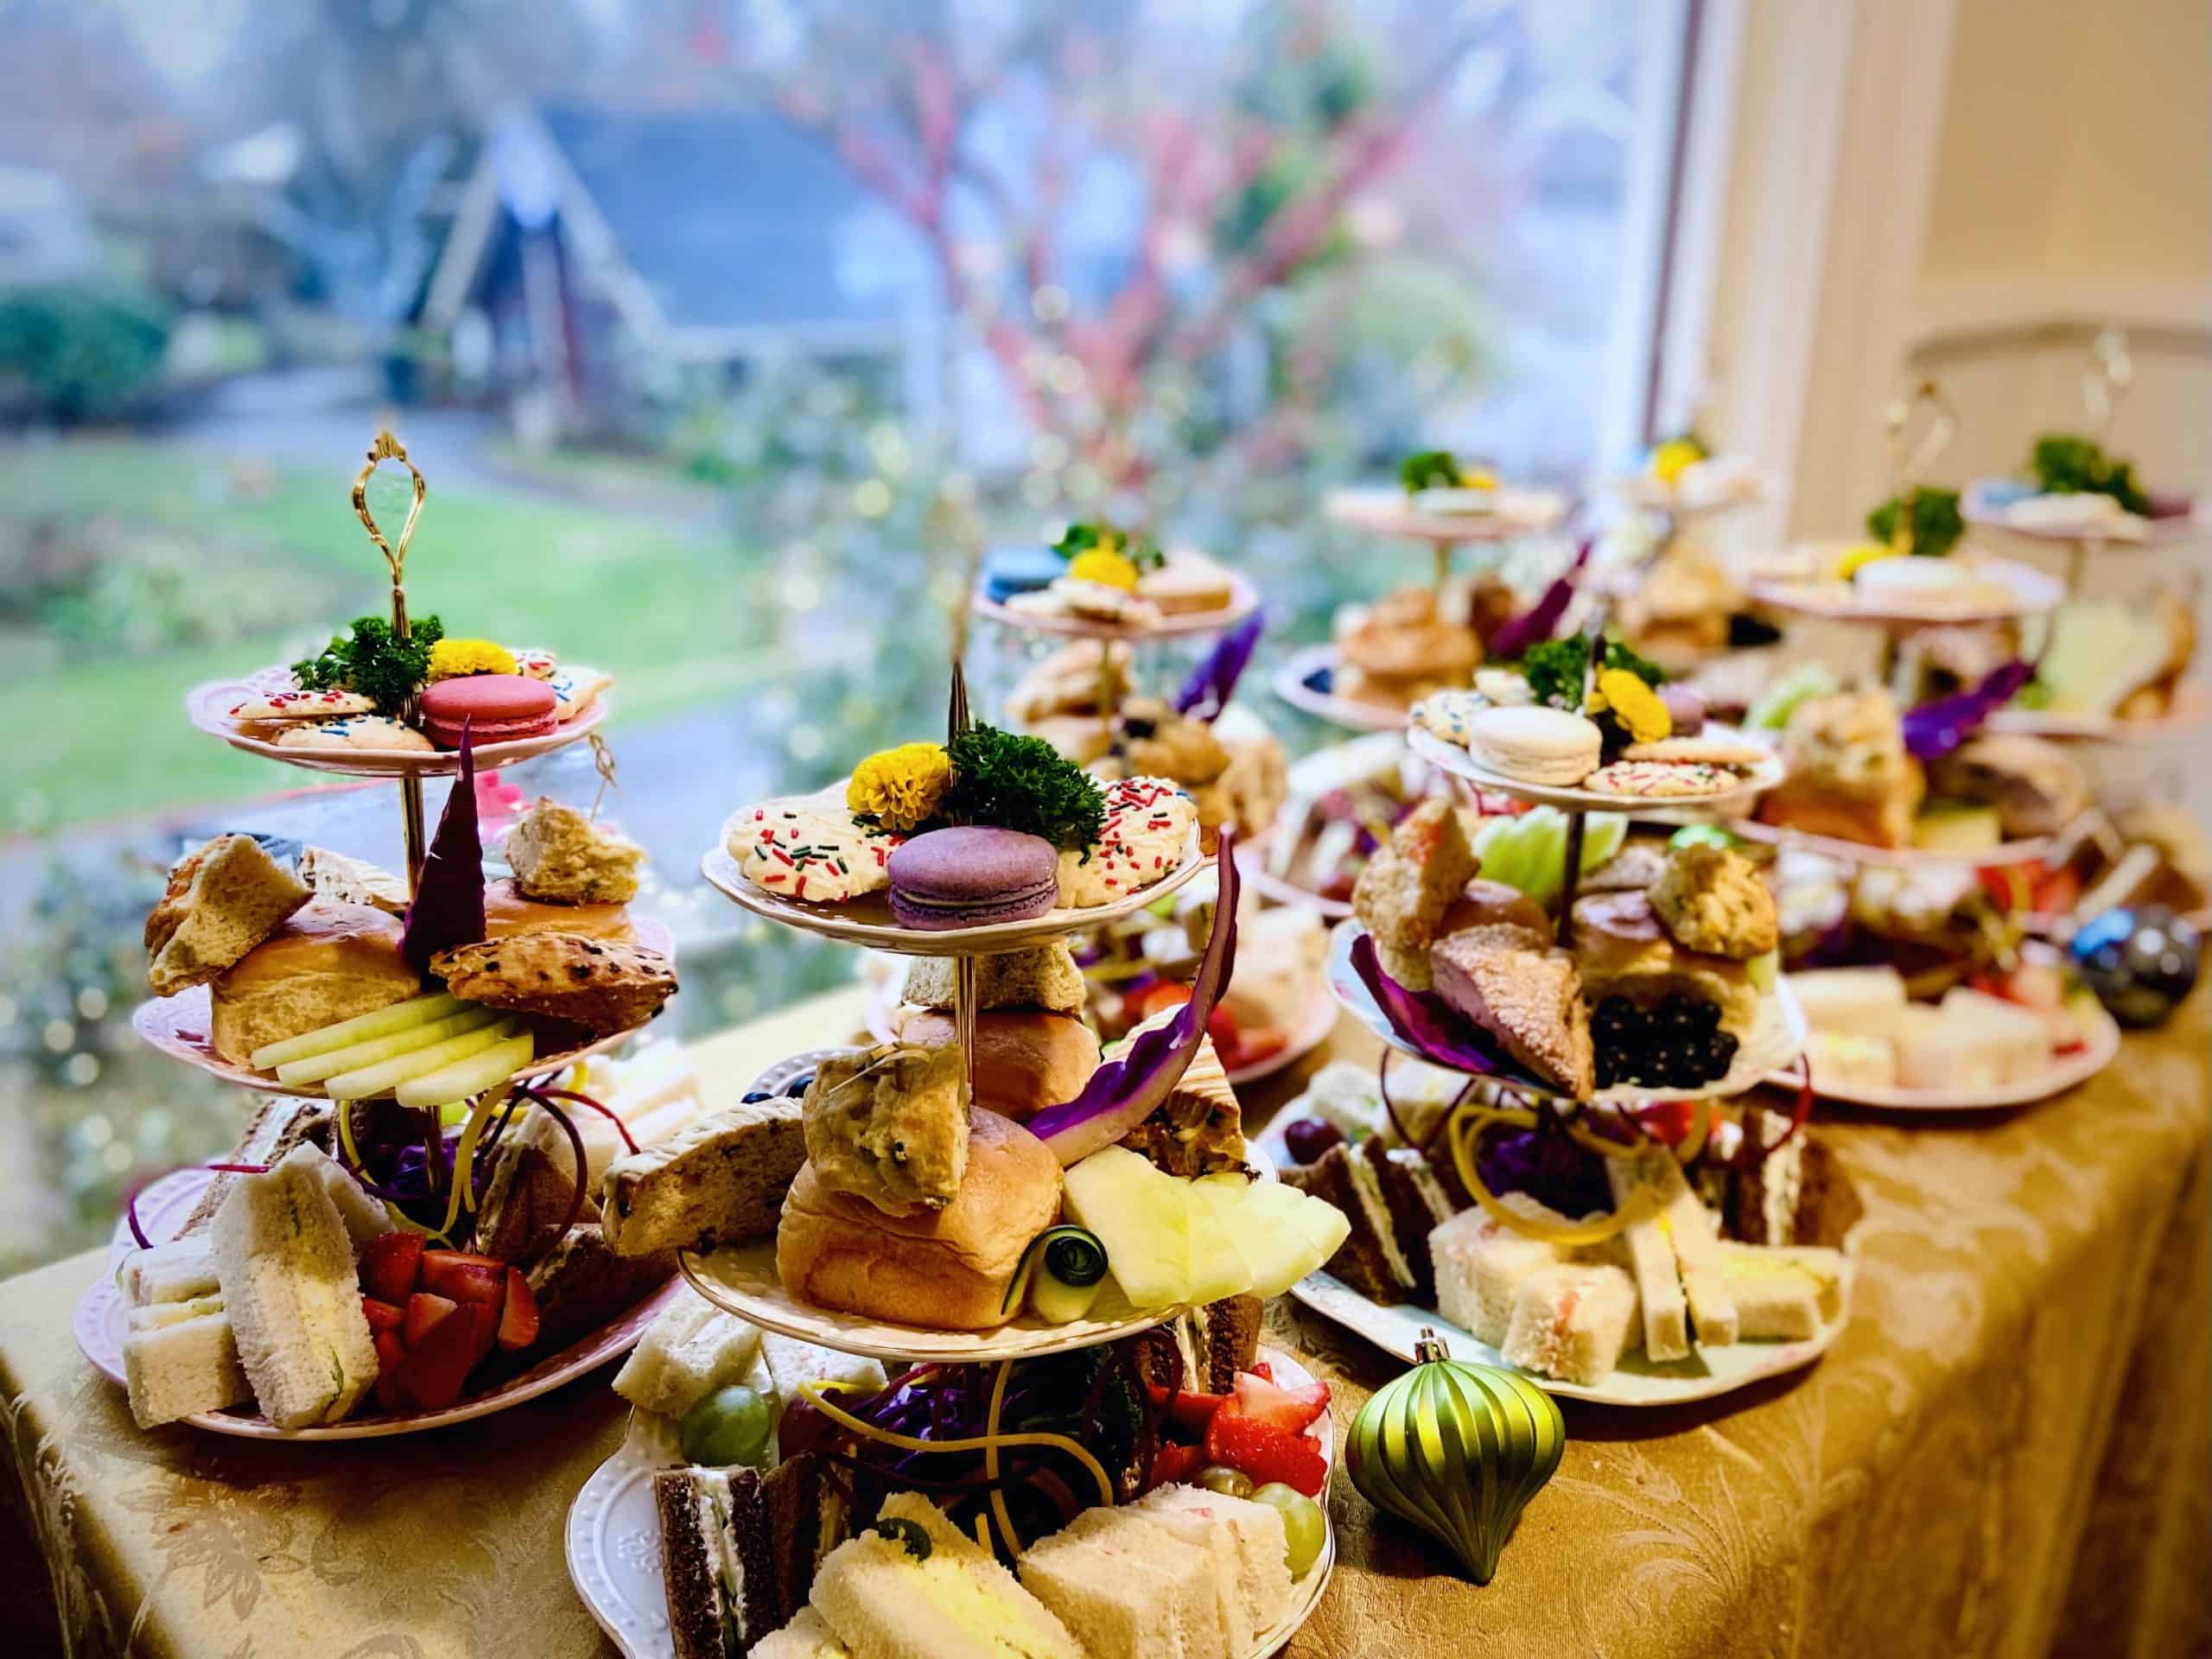 Tea sandwiches, scones, fruit, and pastries rest on three-tiered plates in front of a window